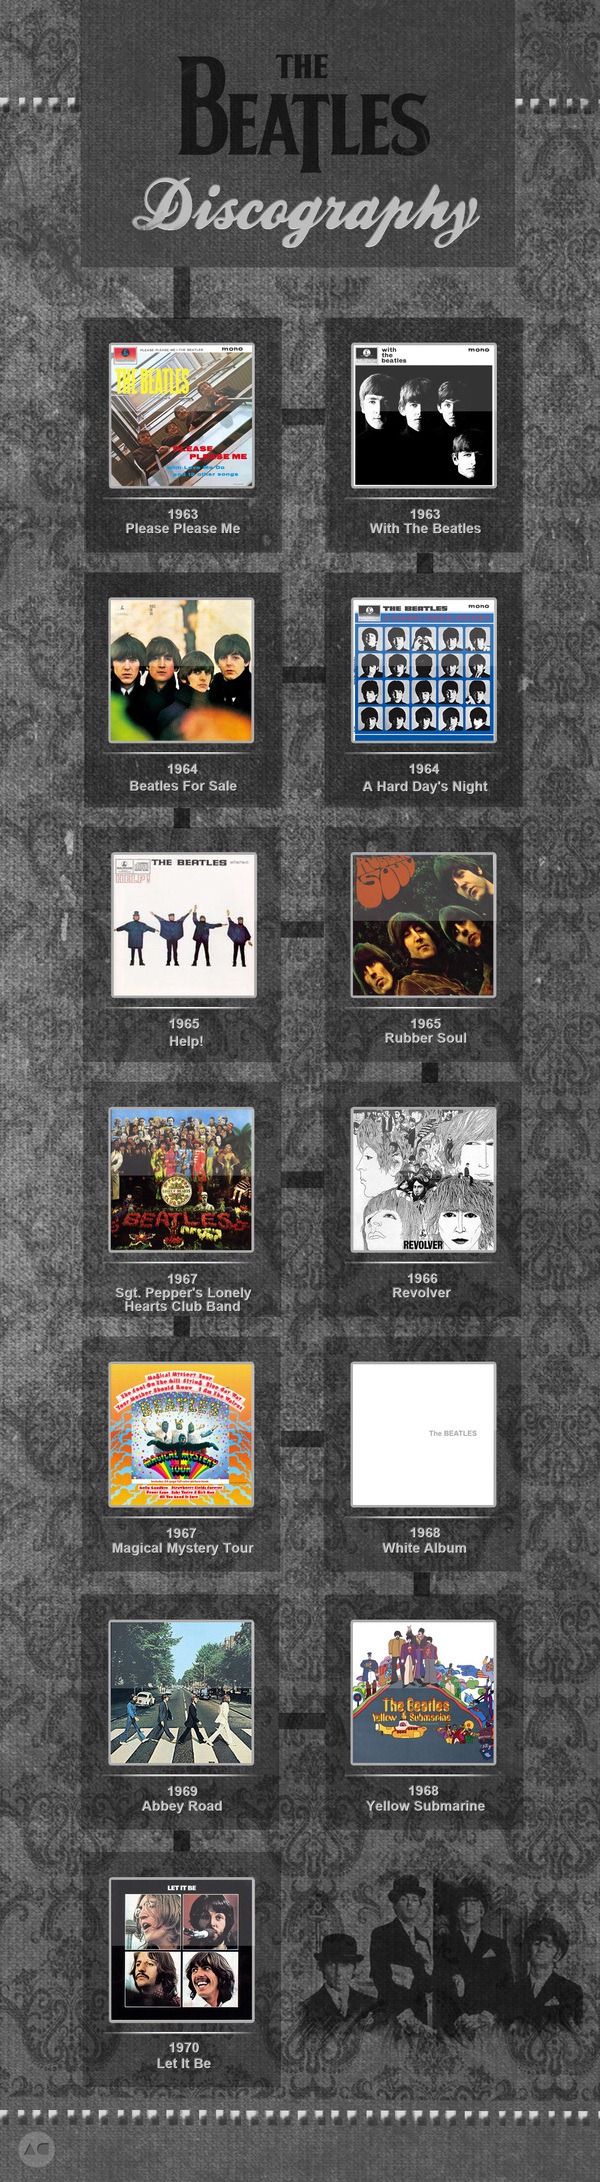 beatles discography